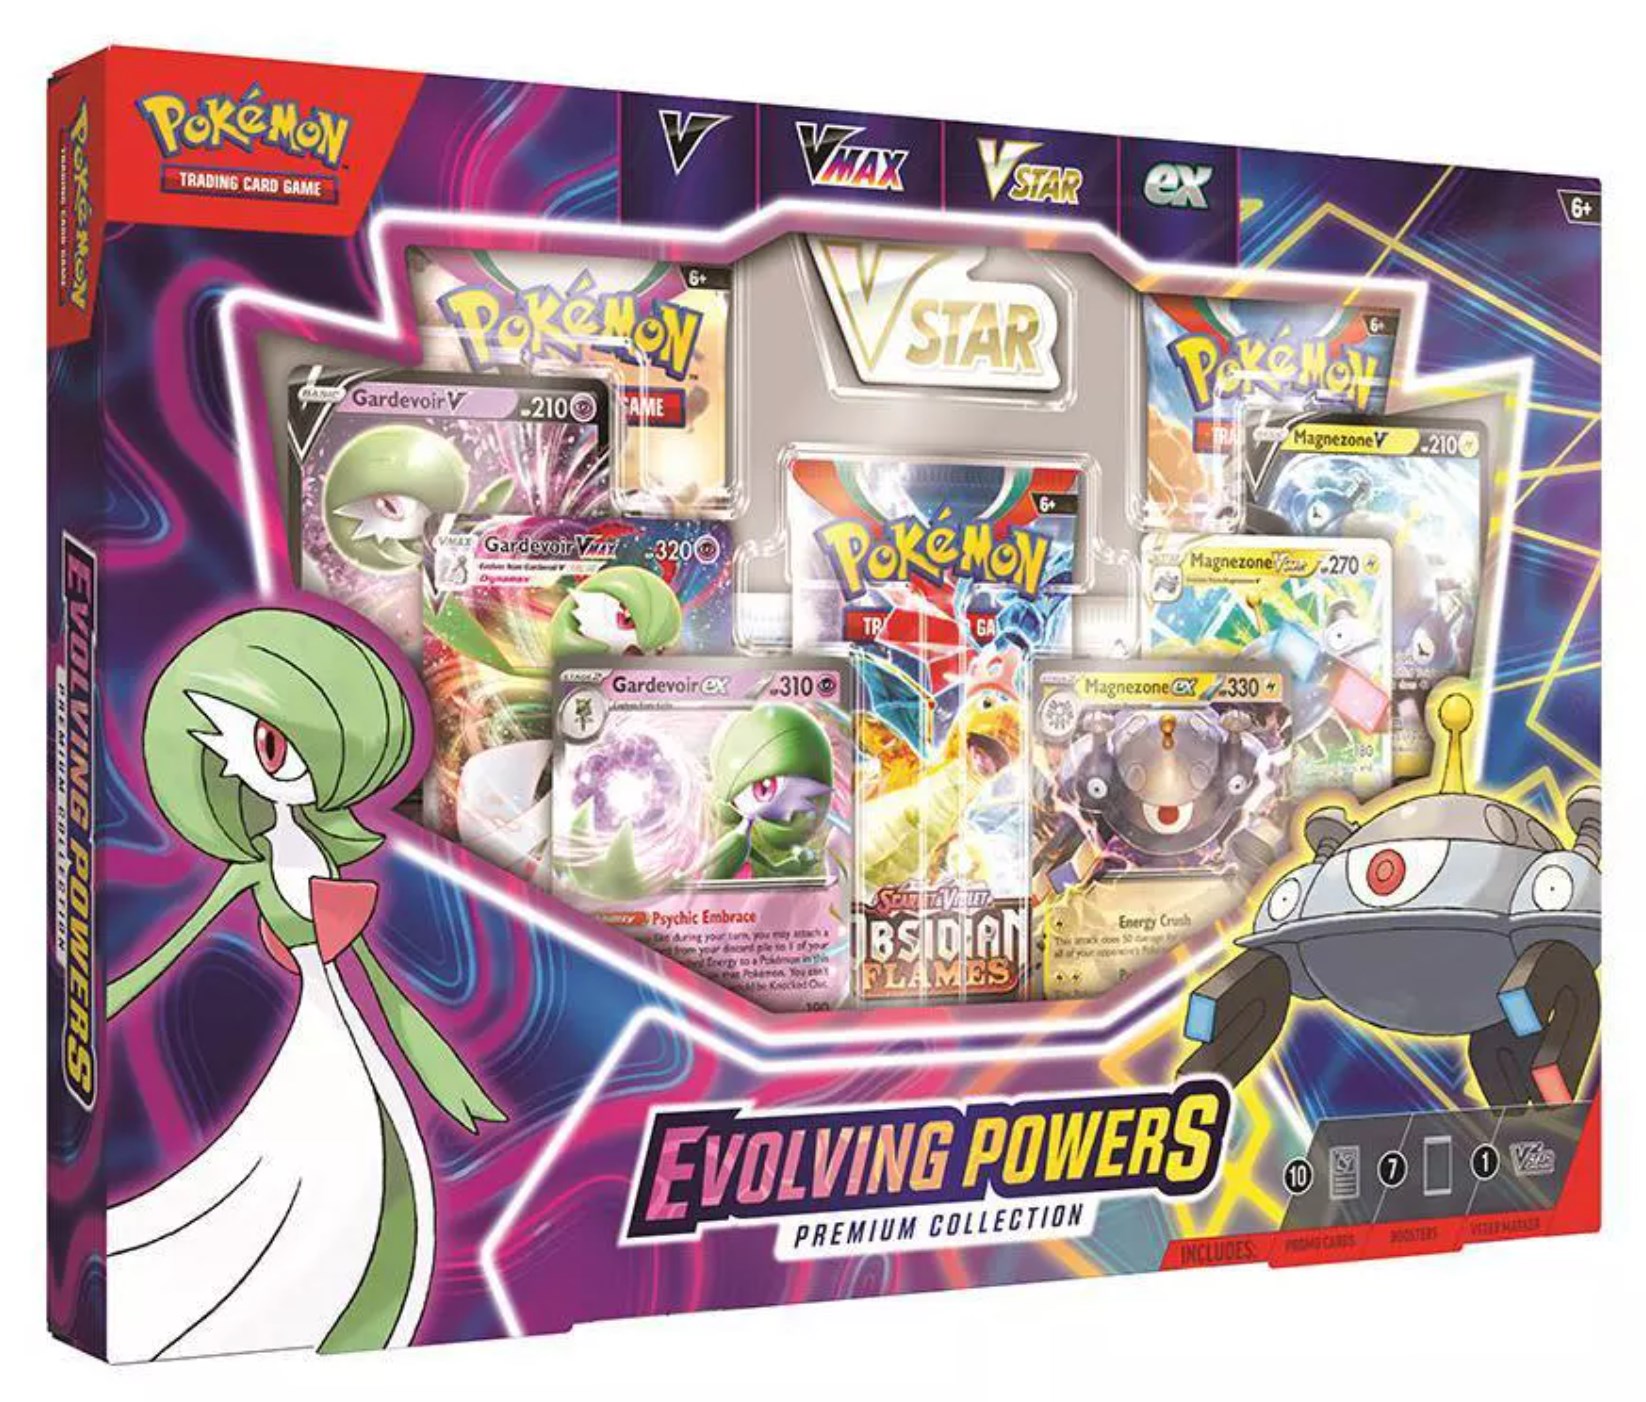 Pokemon Mega Powers Collection Box with 50 Sleeves, Deck Box